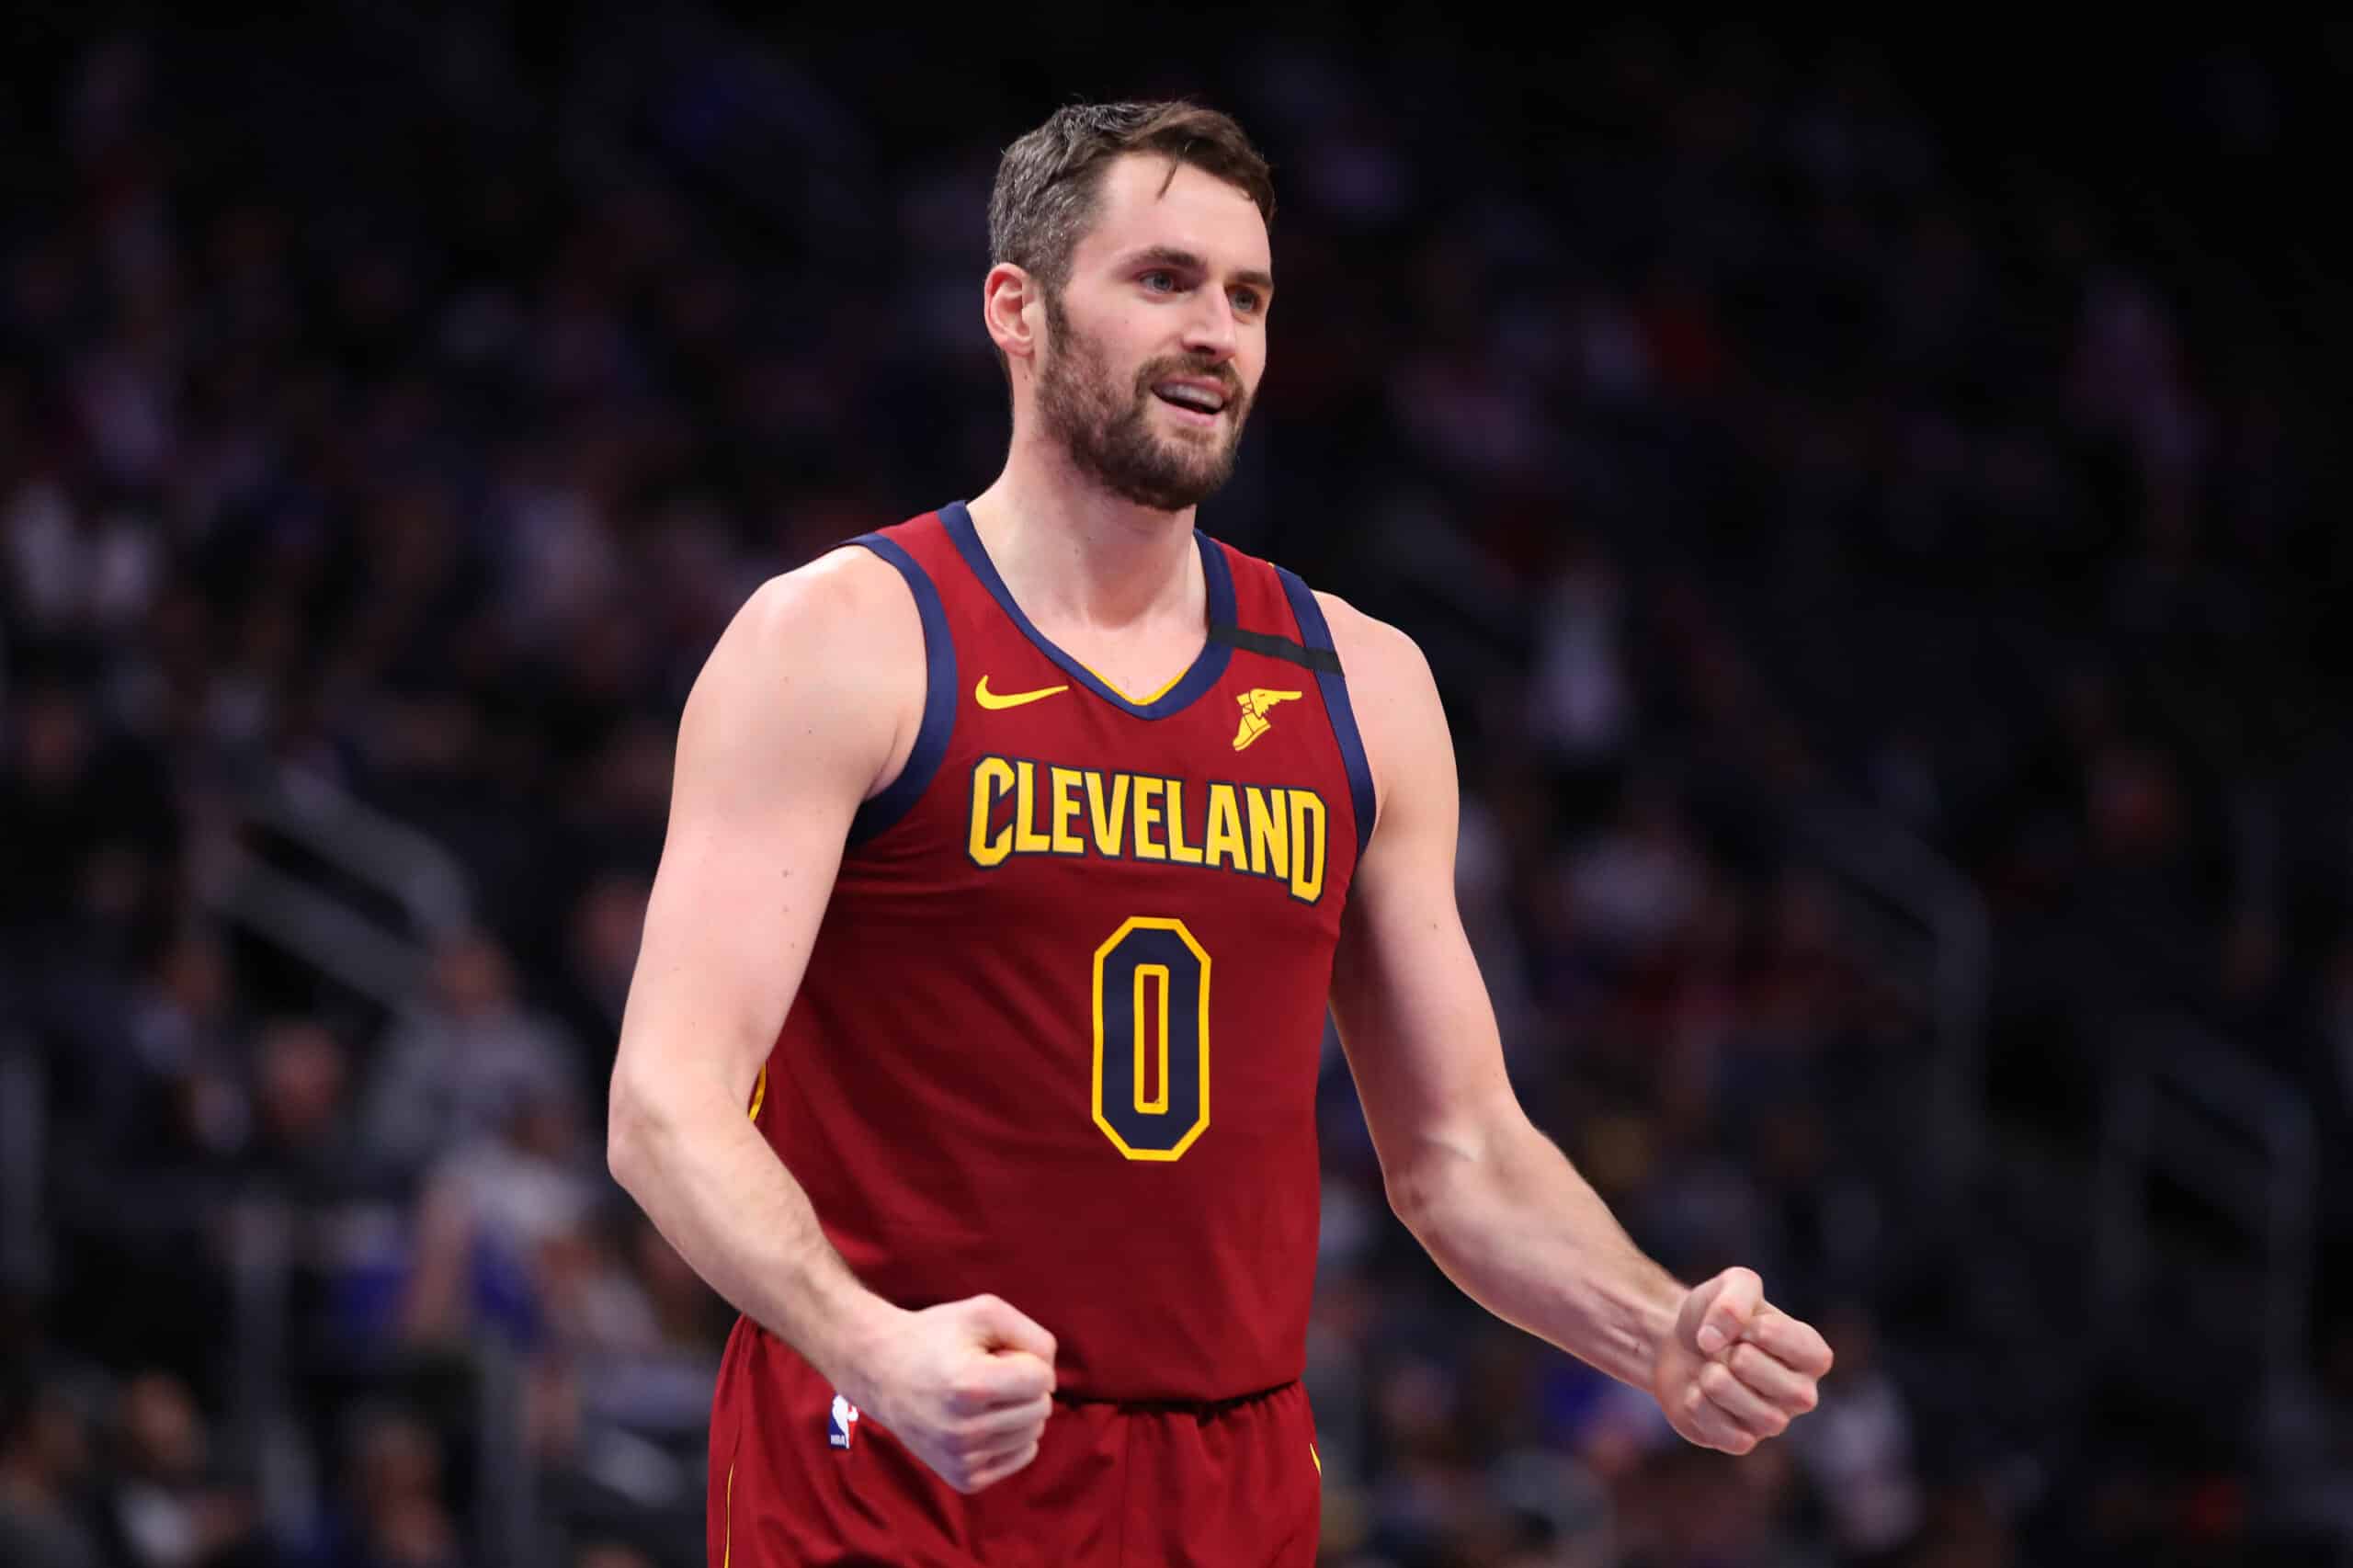 Suns could sign Kevin Love